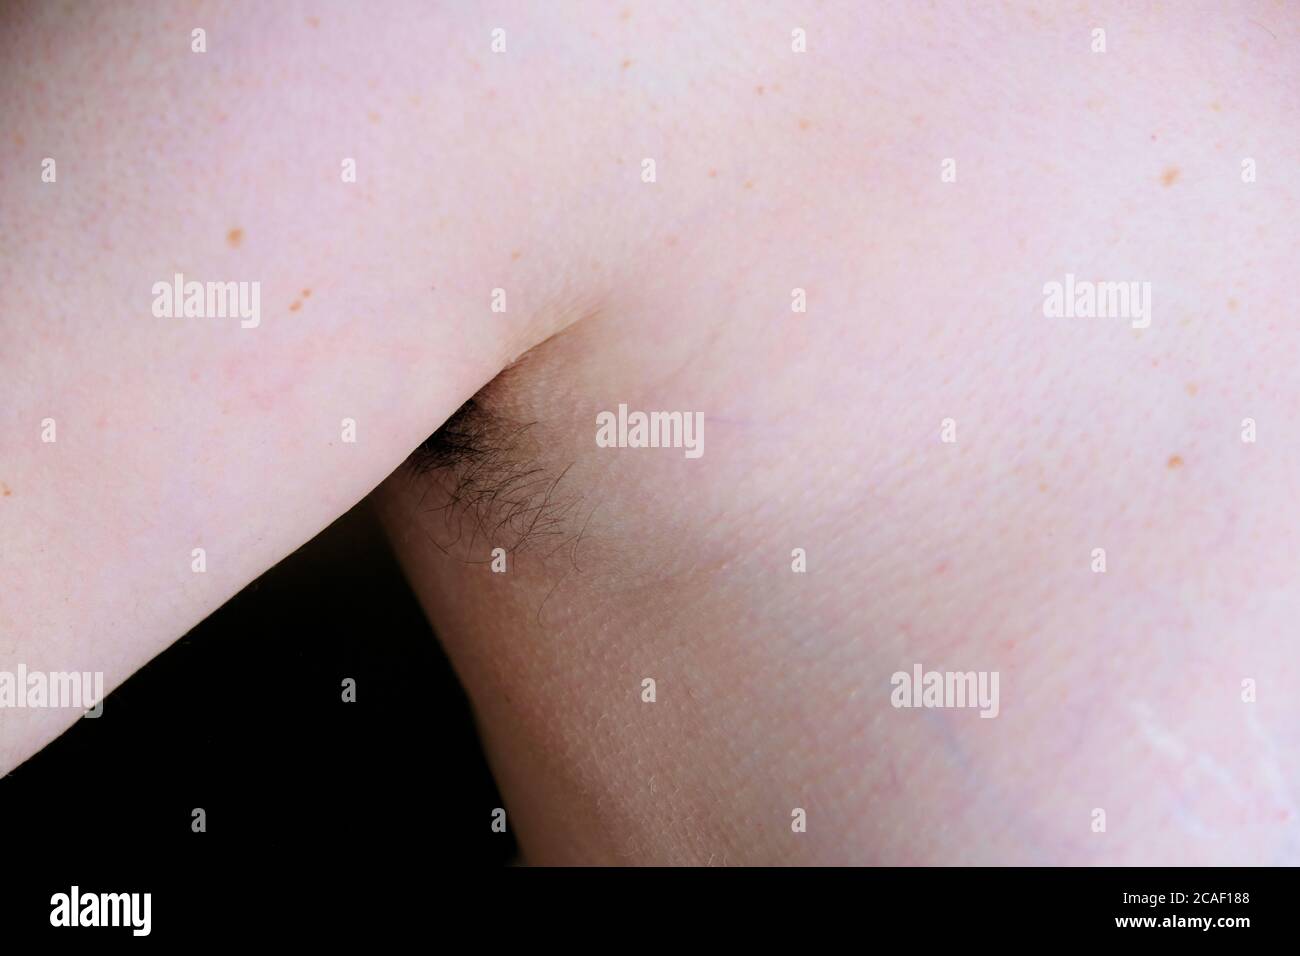 Woman showing hair growth in underarm; result of sheltering in place during the coronavirus quarantine; female with hairy unshaven armpit. Stock Photo